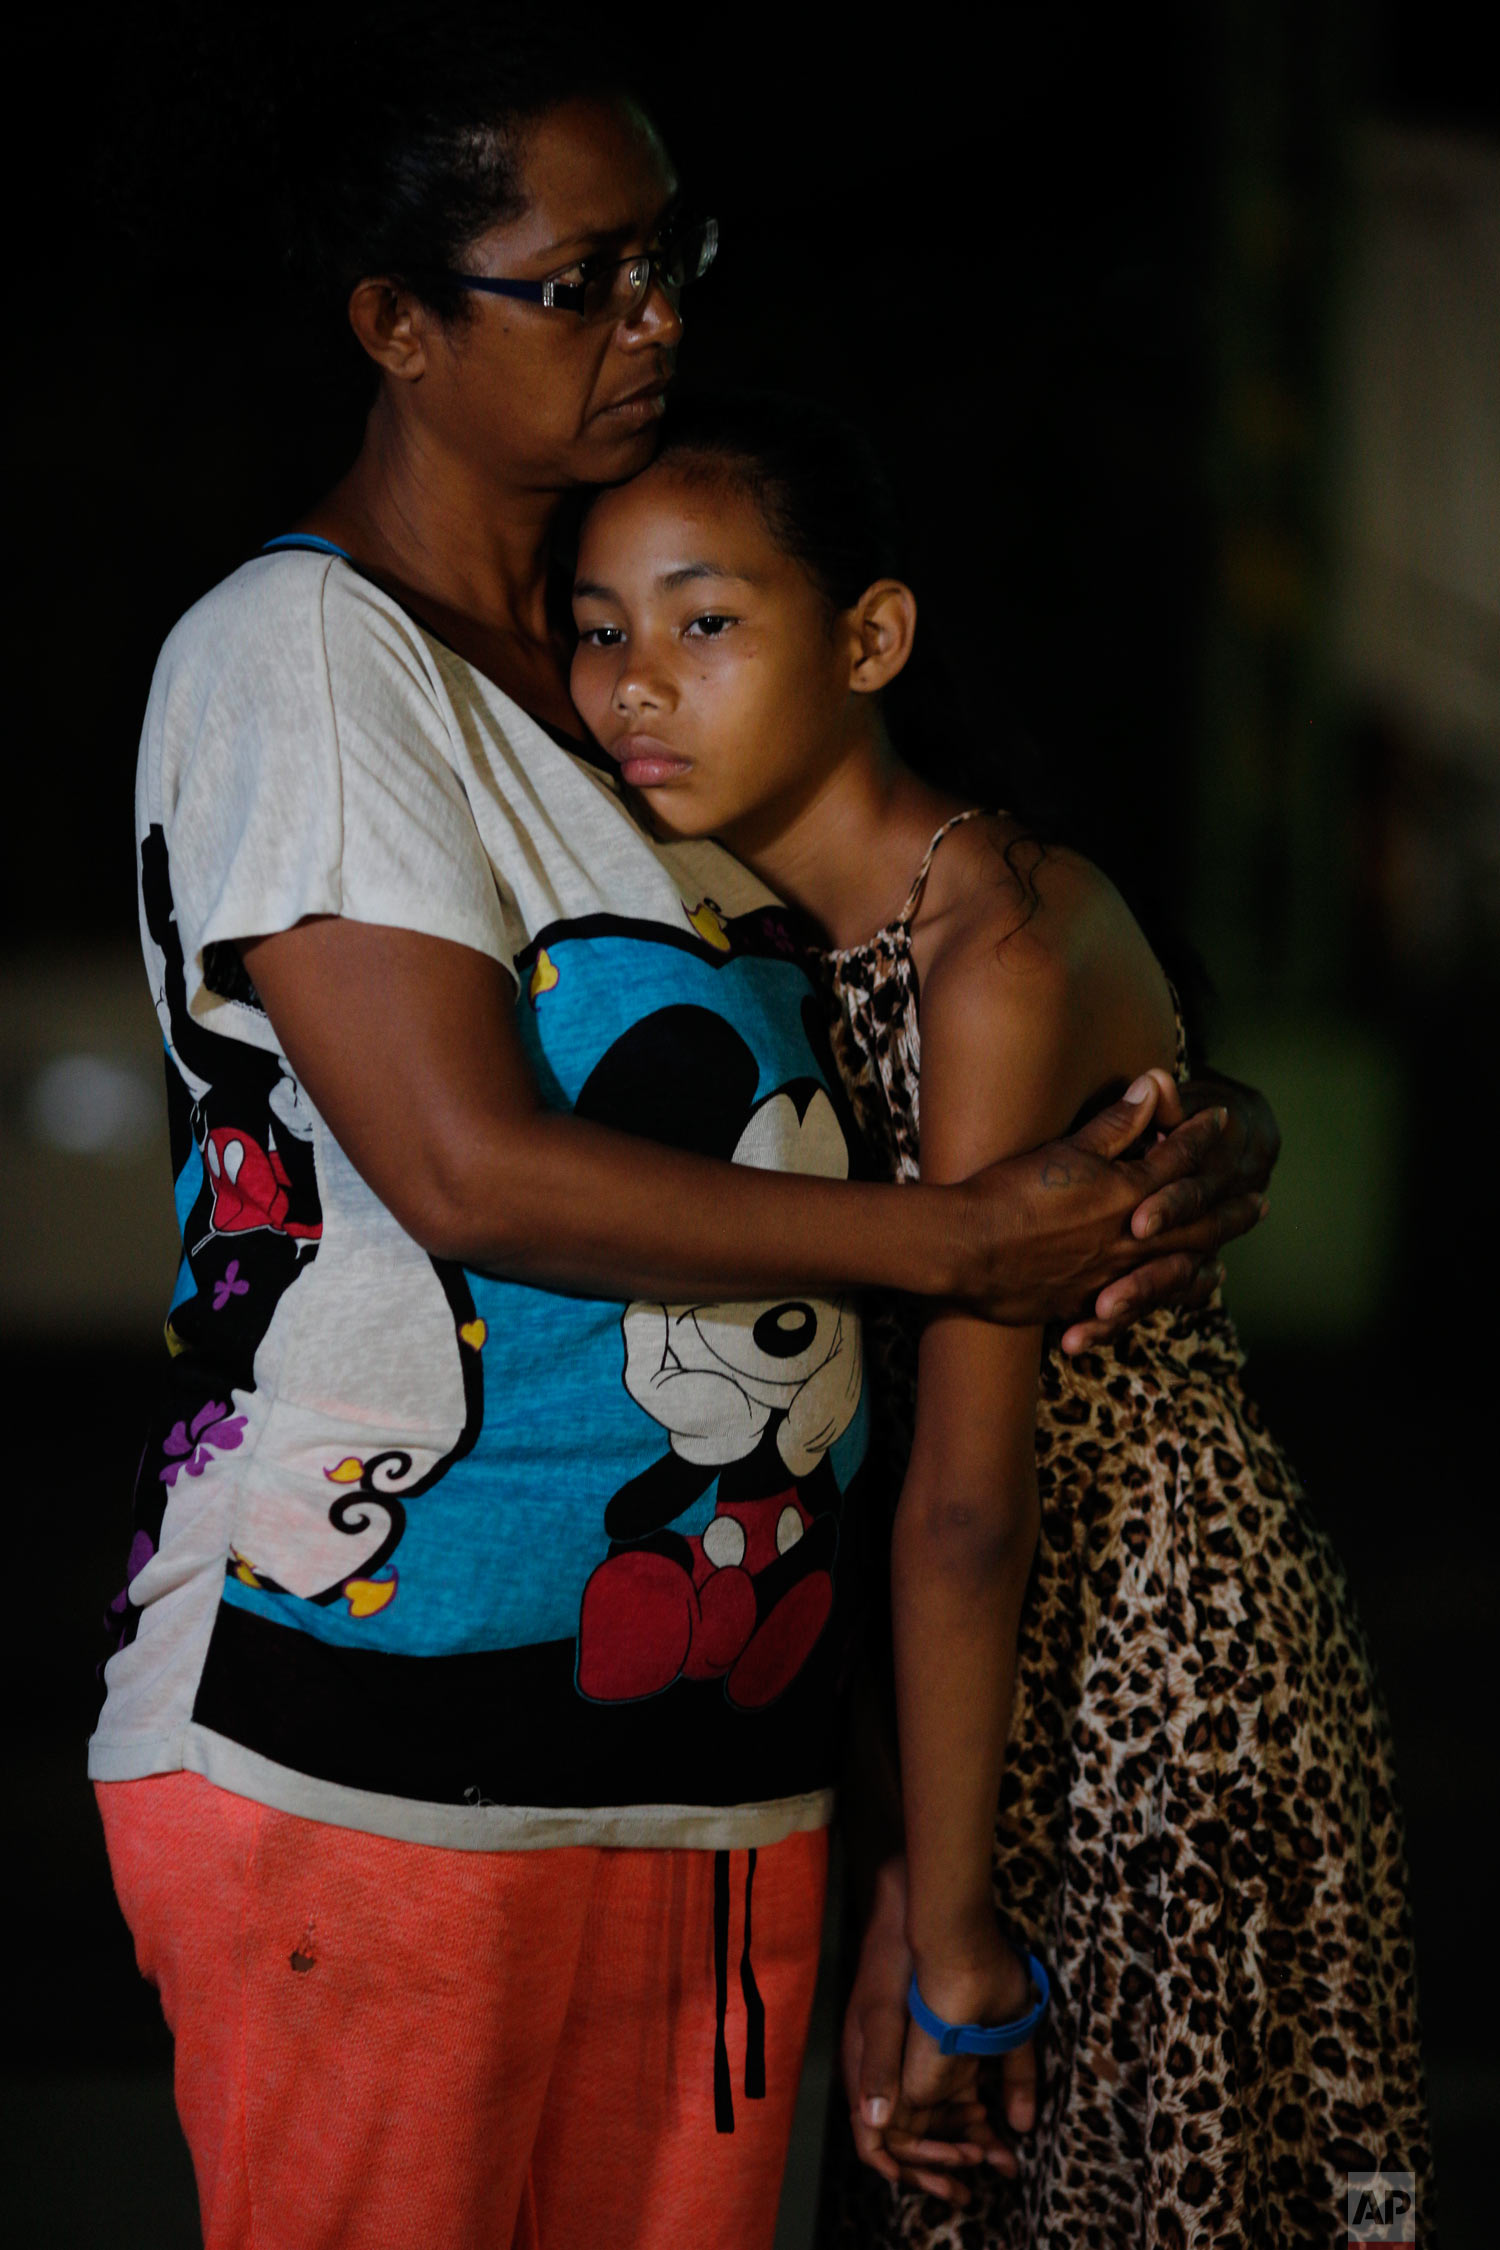  In this Sept. 4, 2018 photo, Venezuelan Sandra Cadiz and her 10-year-old daughter Angelis embrace after spending the night outside a Biomax gas station in a remote stretch of farmland known only as “Kilometer 17” in Santander state, Colombia, on the